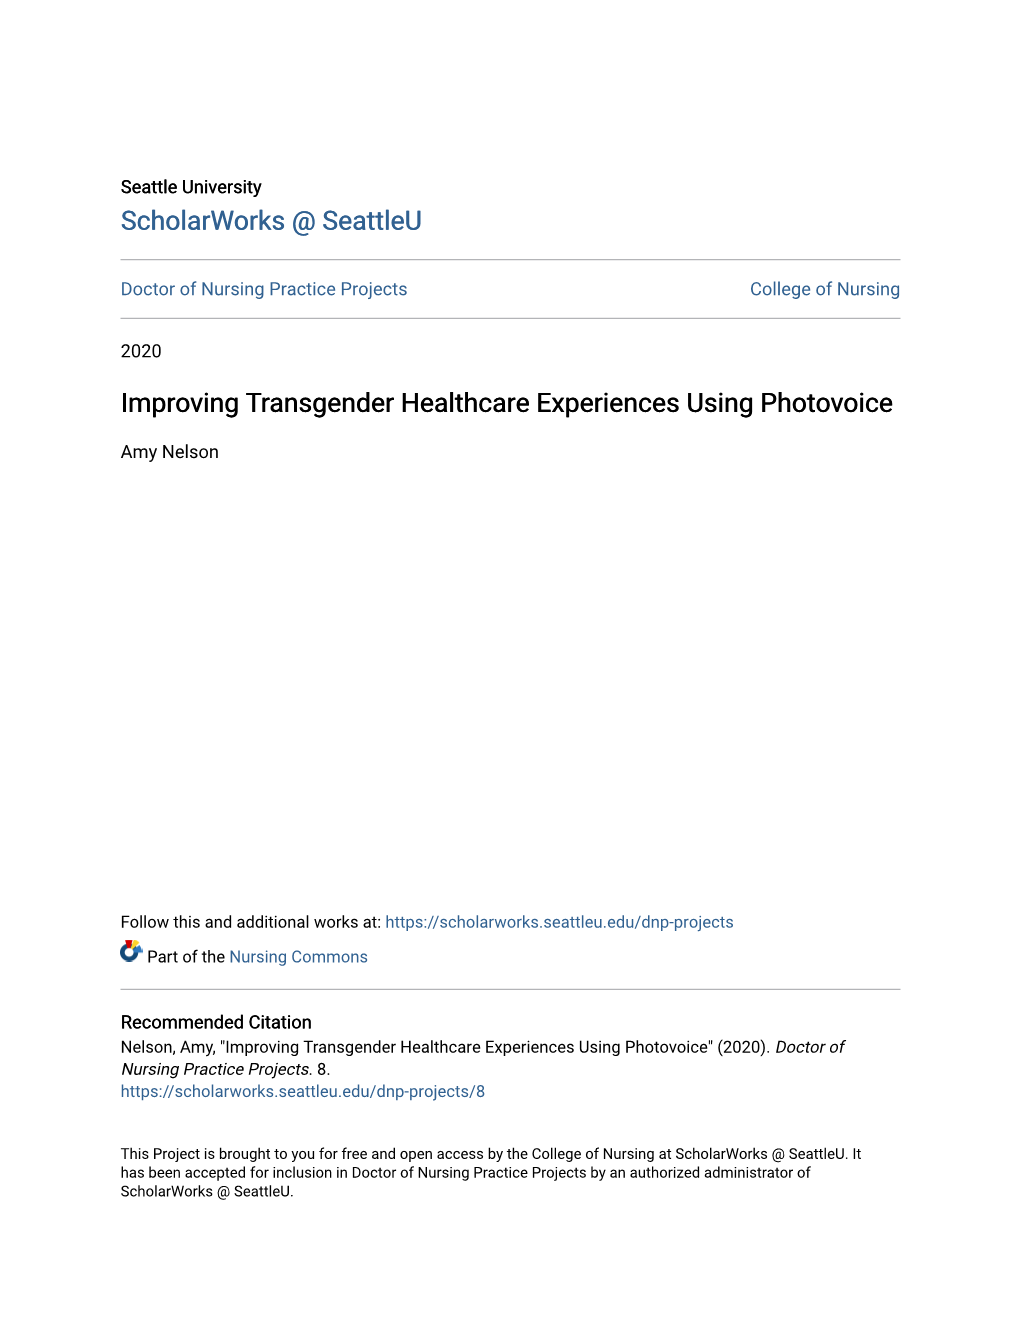 Improving Transgender Healthcare Experiences Using Photovoice